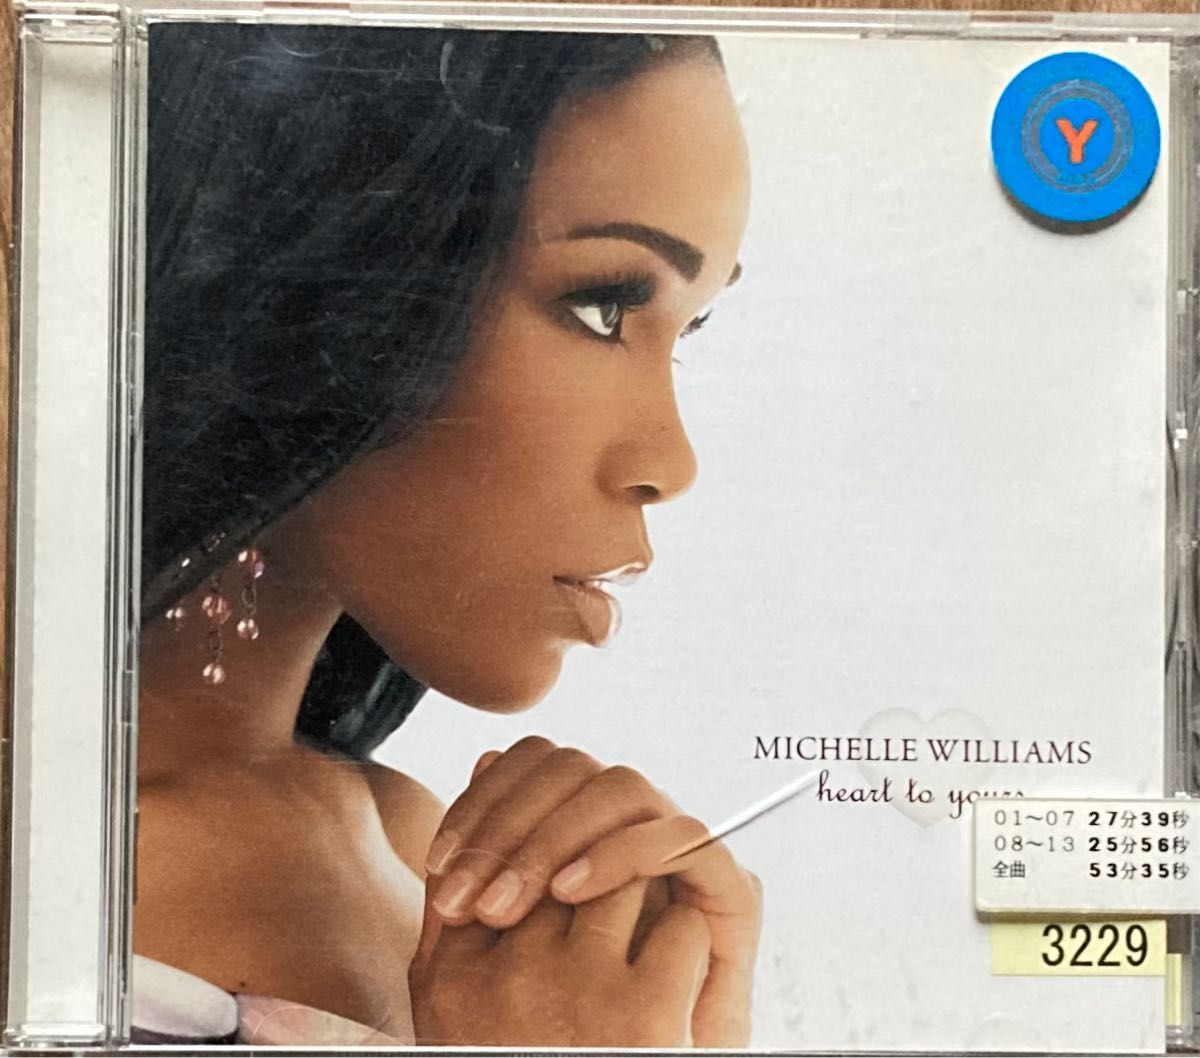 ☆MICHELLE WILLIAMS heart to yours Destiny’s Child デスチャ 帯付き 国内盤☆